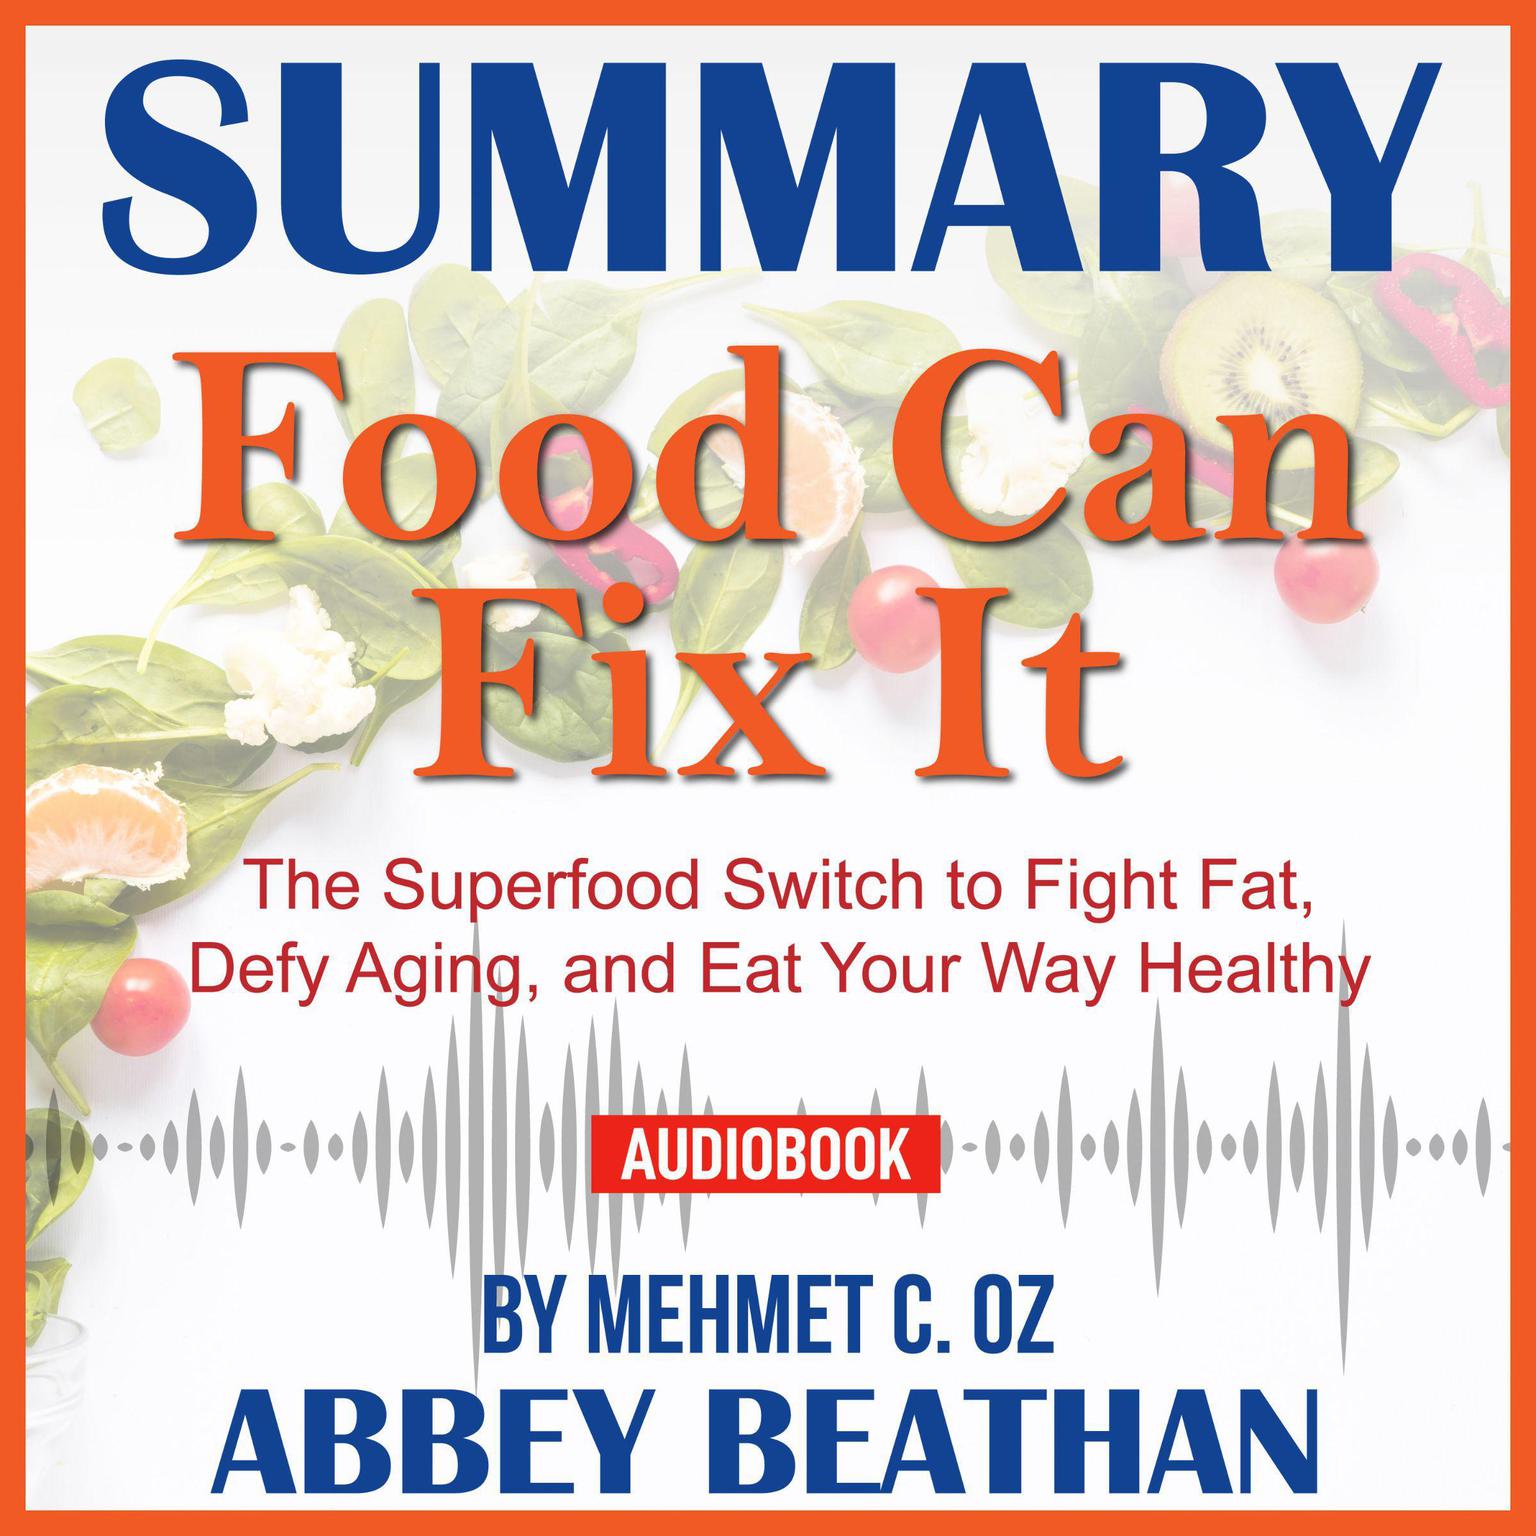 Summary of Food Can Fix It: The Superfood Switch to Fight Fat, Defy Aging, and Eat Your Way Healthy by Mehmet C. Oz Audiobook, by Abbey Beathan